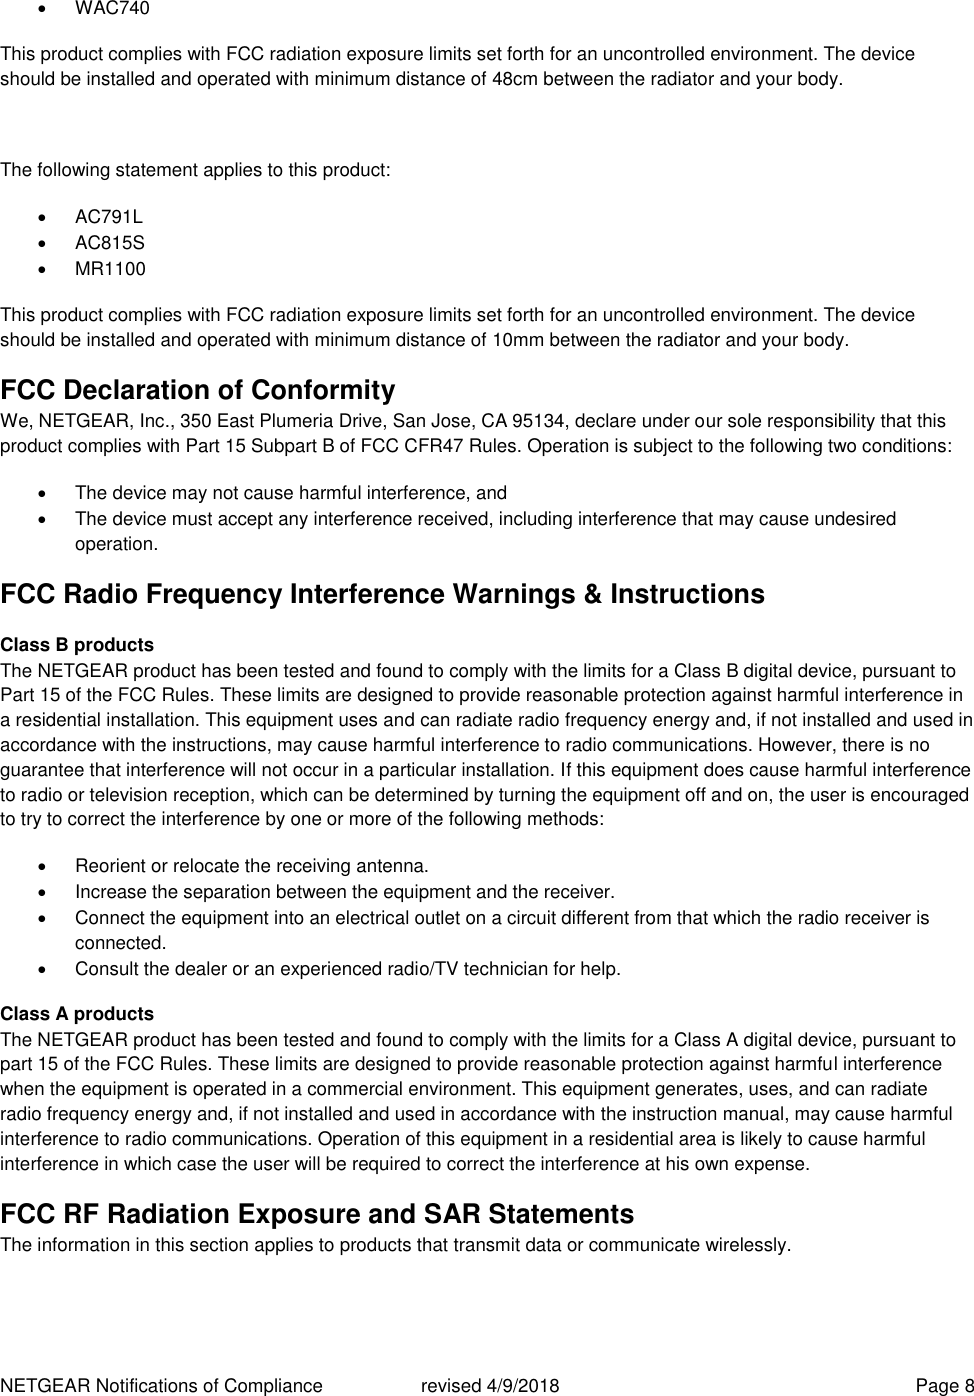 NETGEAR Notifications of Compliance    revised 4/9/2018  Page 8   WAC740 This product complies with FCC radiation exposure limits set forth for an uncontrolled environment. The device should be installed and operated with minimum distance of 48cm between the radiator and your body.  The following statement applies to this product:   AC791L   AC815S   MR1100 This product complies with FCC radiation exposure limits set forth for an uncontrolled environment. The device should be installed and operated with minimum distance of 10mm between the radiator and your body. FCC Declaration of Conformity We, NETGEAR, Inc., 350 East Plumeria Drive, San Jose, CA 95134, declare under our sole responsibility that this product complies with Part 15 Subpart B of FCC CFR47 Rules. Operation is subject to the following two conditions:   The device may not cause harmful interference, and   The device must accept any interference received, including interference that may cause undesired operation. FCC Radio Frequency Interference Warnings &amp; Instructions Class B products The NETGEAR product has been tested and found to comply with the limits for a Class B digital device, pursuant to Part 15 of the FCC Rules. These limits are designed to provide reasonable protection against harmful interference in a residential installation. This equipment uses and can radiate radio frequency energy and, if not installed and used in accordance with the instructions, may cause harmful interference to radio communications. However, there is no guarantee that interference will not occur in a particular installation. If this equipment does cause harmful interference to radio or television reception, which can be determined by turning the equipment off and on, the user is encouraged to try to correct the interference by one or more of the following methods:   Reorient or relocate the receiving antenna.   Increase the separation between the equipment and the receiver.   Connect the equipment into an electrical outlet on a circuit different from that which the radio receiver is connected.   Consult the dealer or an experienced radio/TV technician for help. Class A products The NETGEAR product has been tested and found to comply with the limits for a Class A digital device, pursuant to part 15 of the FCC Rules. These limits are designed to provide reasonable protection against harmful interference when the equipment is operated in a commercial environment. This equipment generates, uses, and can radiate radio frequency energy and, if not installed and used in accordance with the instruction manual, may cause harmful interference to radio communications. Operation of this equipment in a residential area is likely to cause harmful interference in which case the user will be required to correct the interference at his own expense. FCC RF Radiation Exposure and SAR Statements The information in this section applies to products that transmit data or communicate wirelessly. 